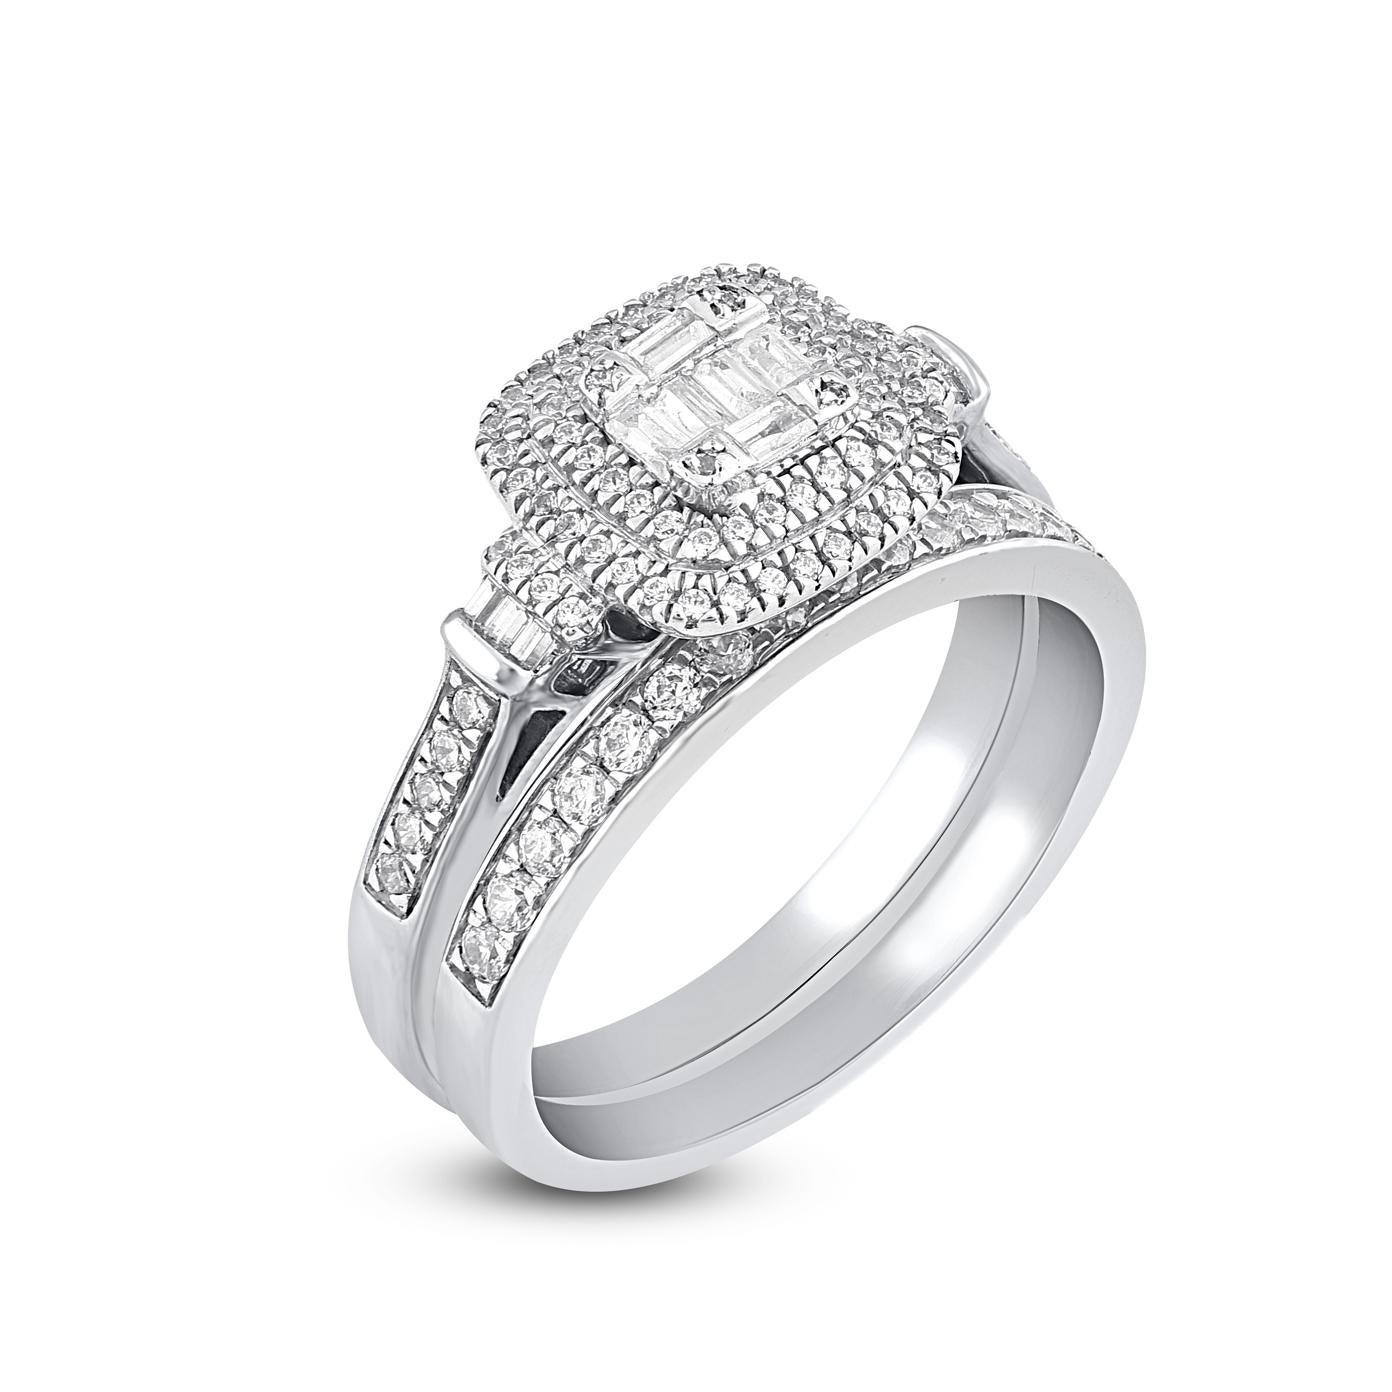 Contemporary TJD 0.55 Carat Round and Baguette Diamond 14 Karat White Gold Bridal Ring Set For Sale